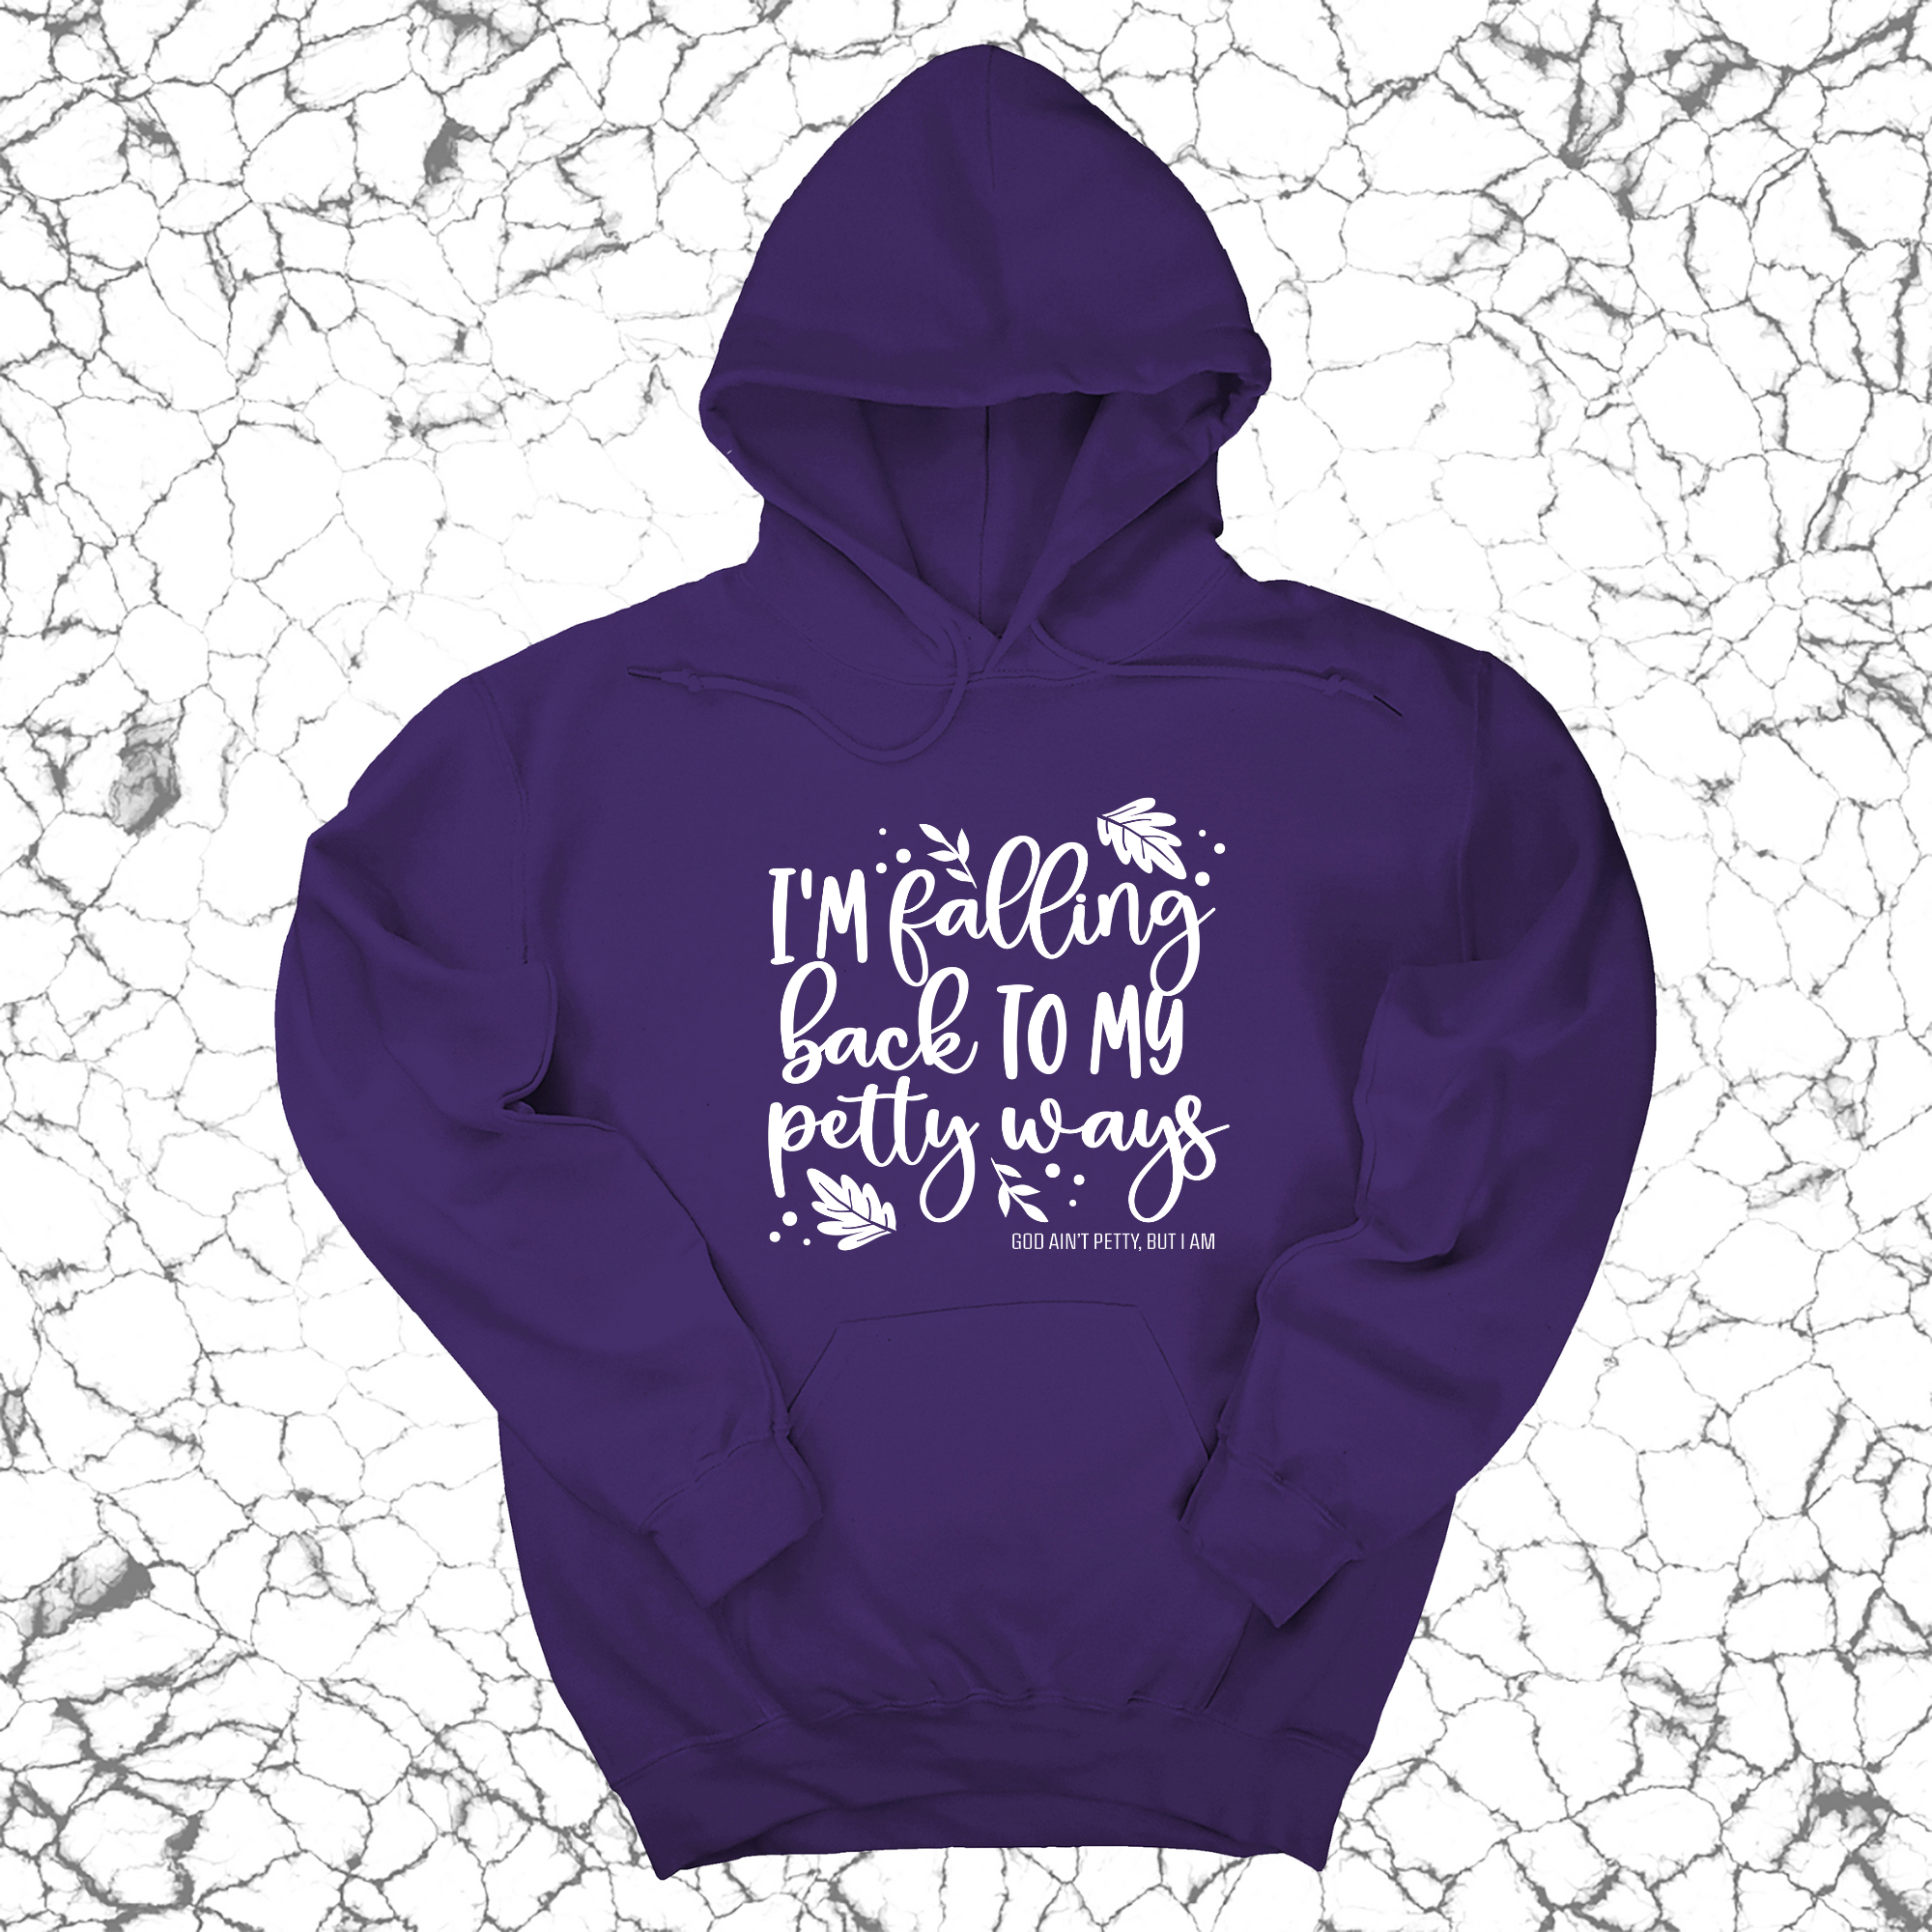 I'm Falling Back to my Petty Ways Unisex Hoodie-Hoodie-The Original God Ain't Petty But I Am